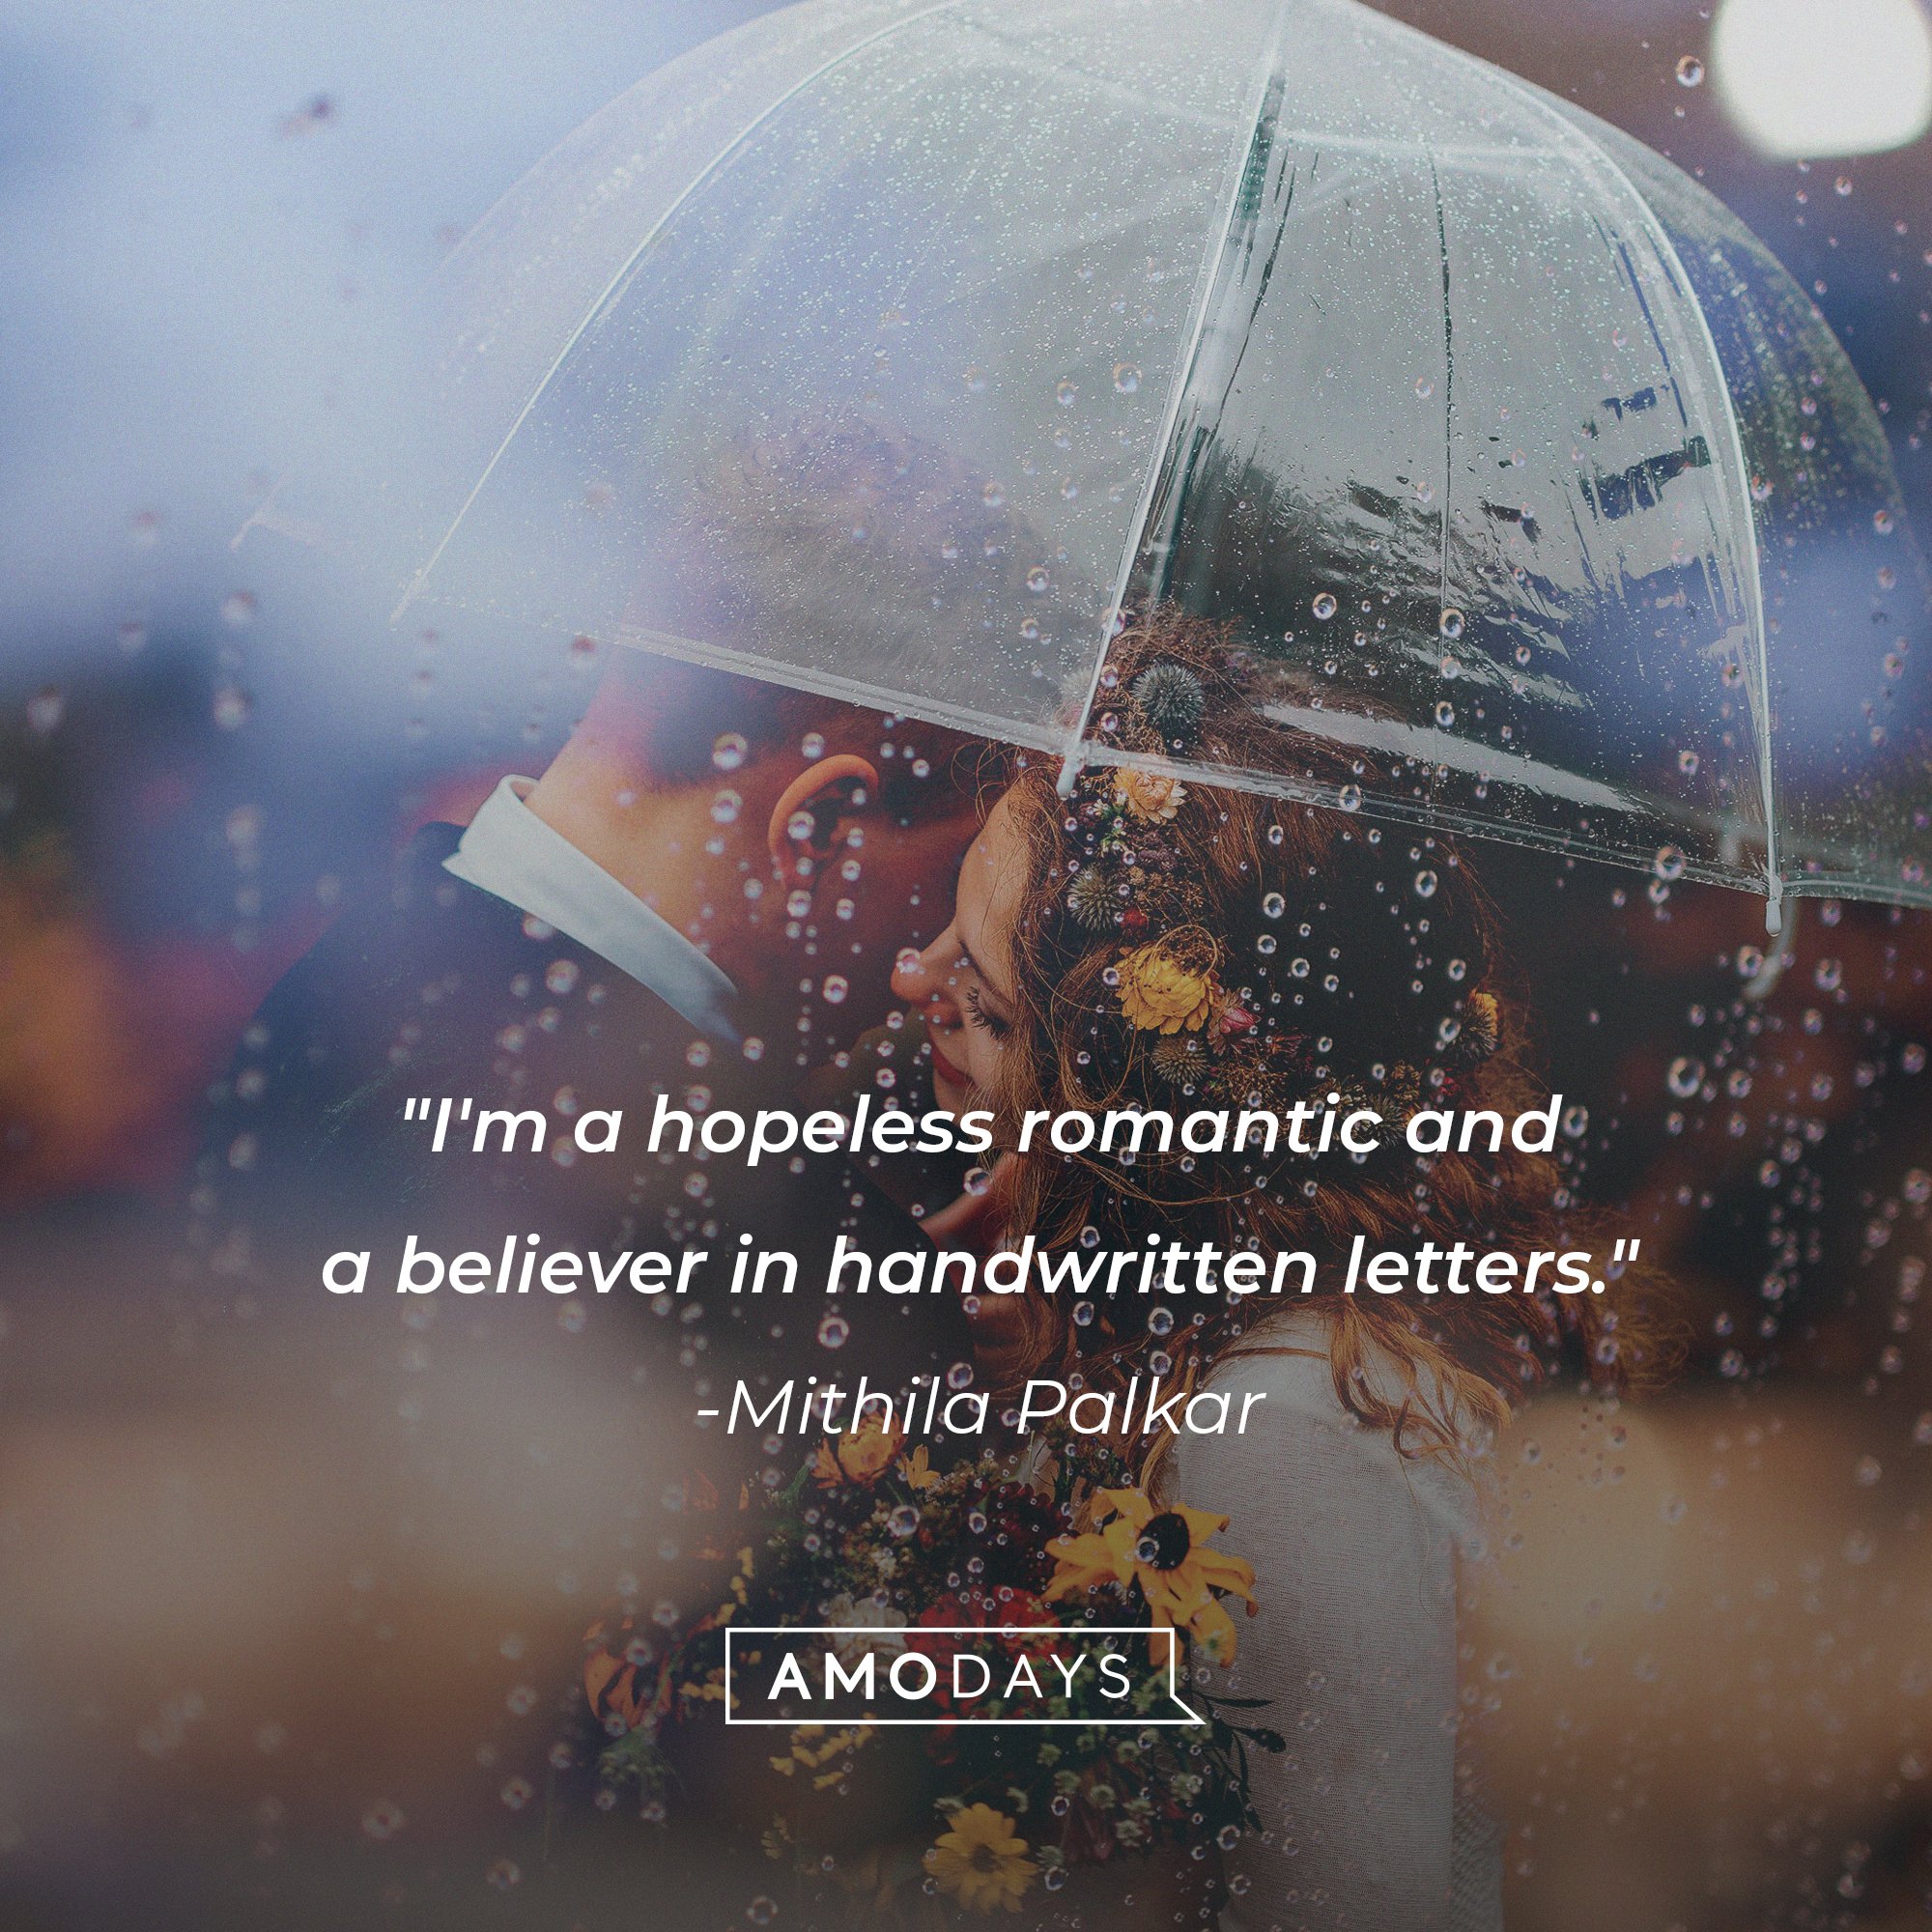 Mithila Palkar’s quote: "I'm a hopeless romantic and a believer in handwritten letters." | Image: AmoDays